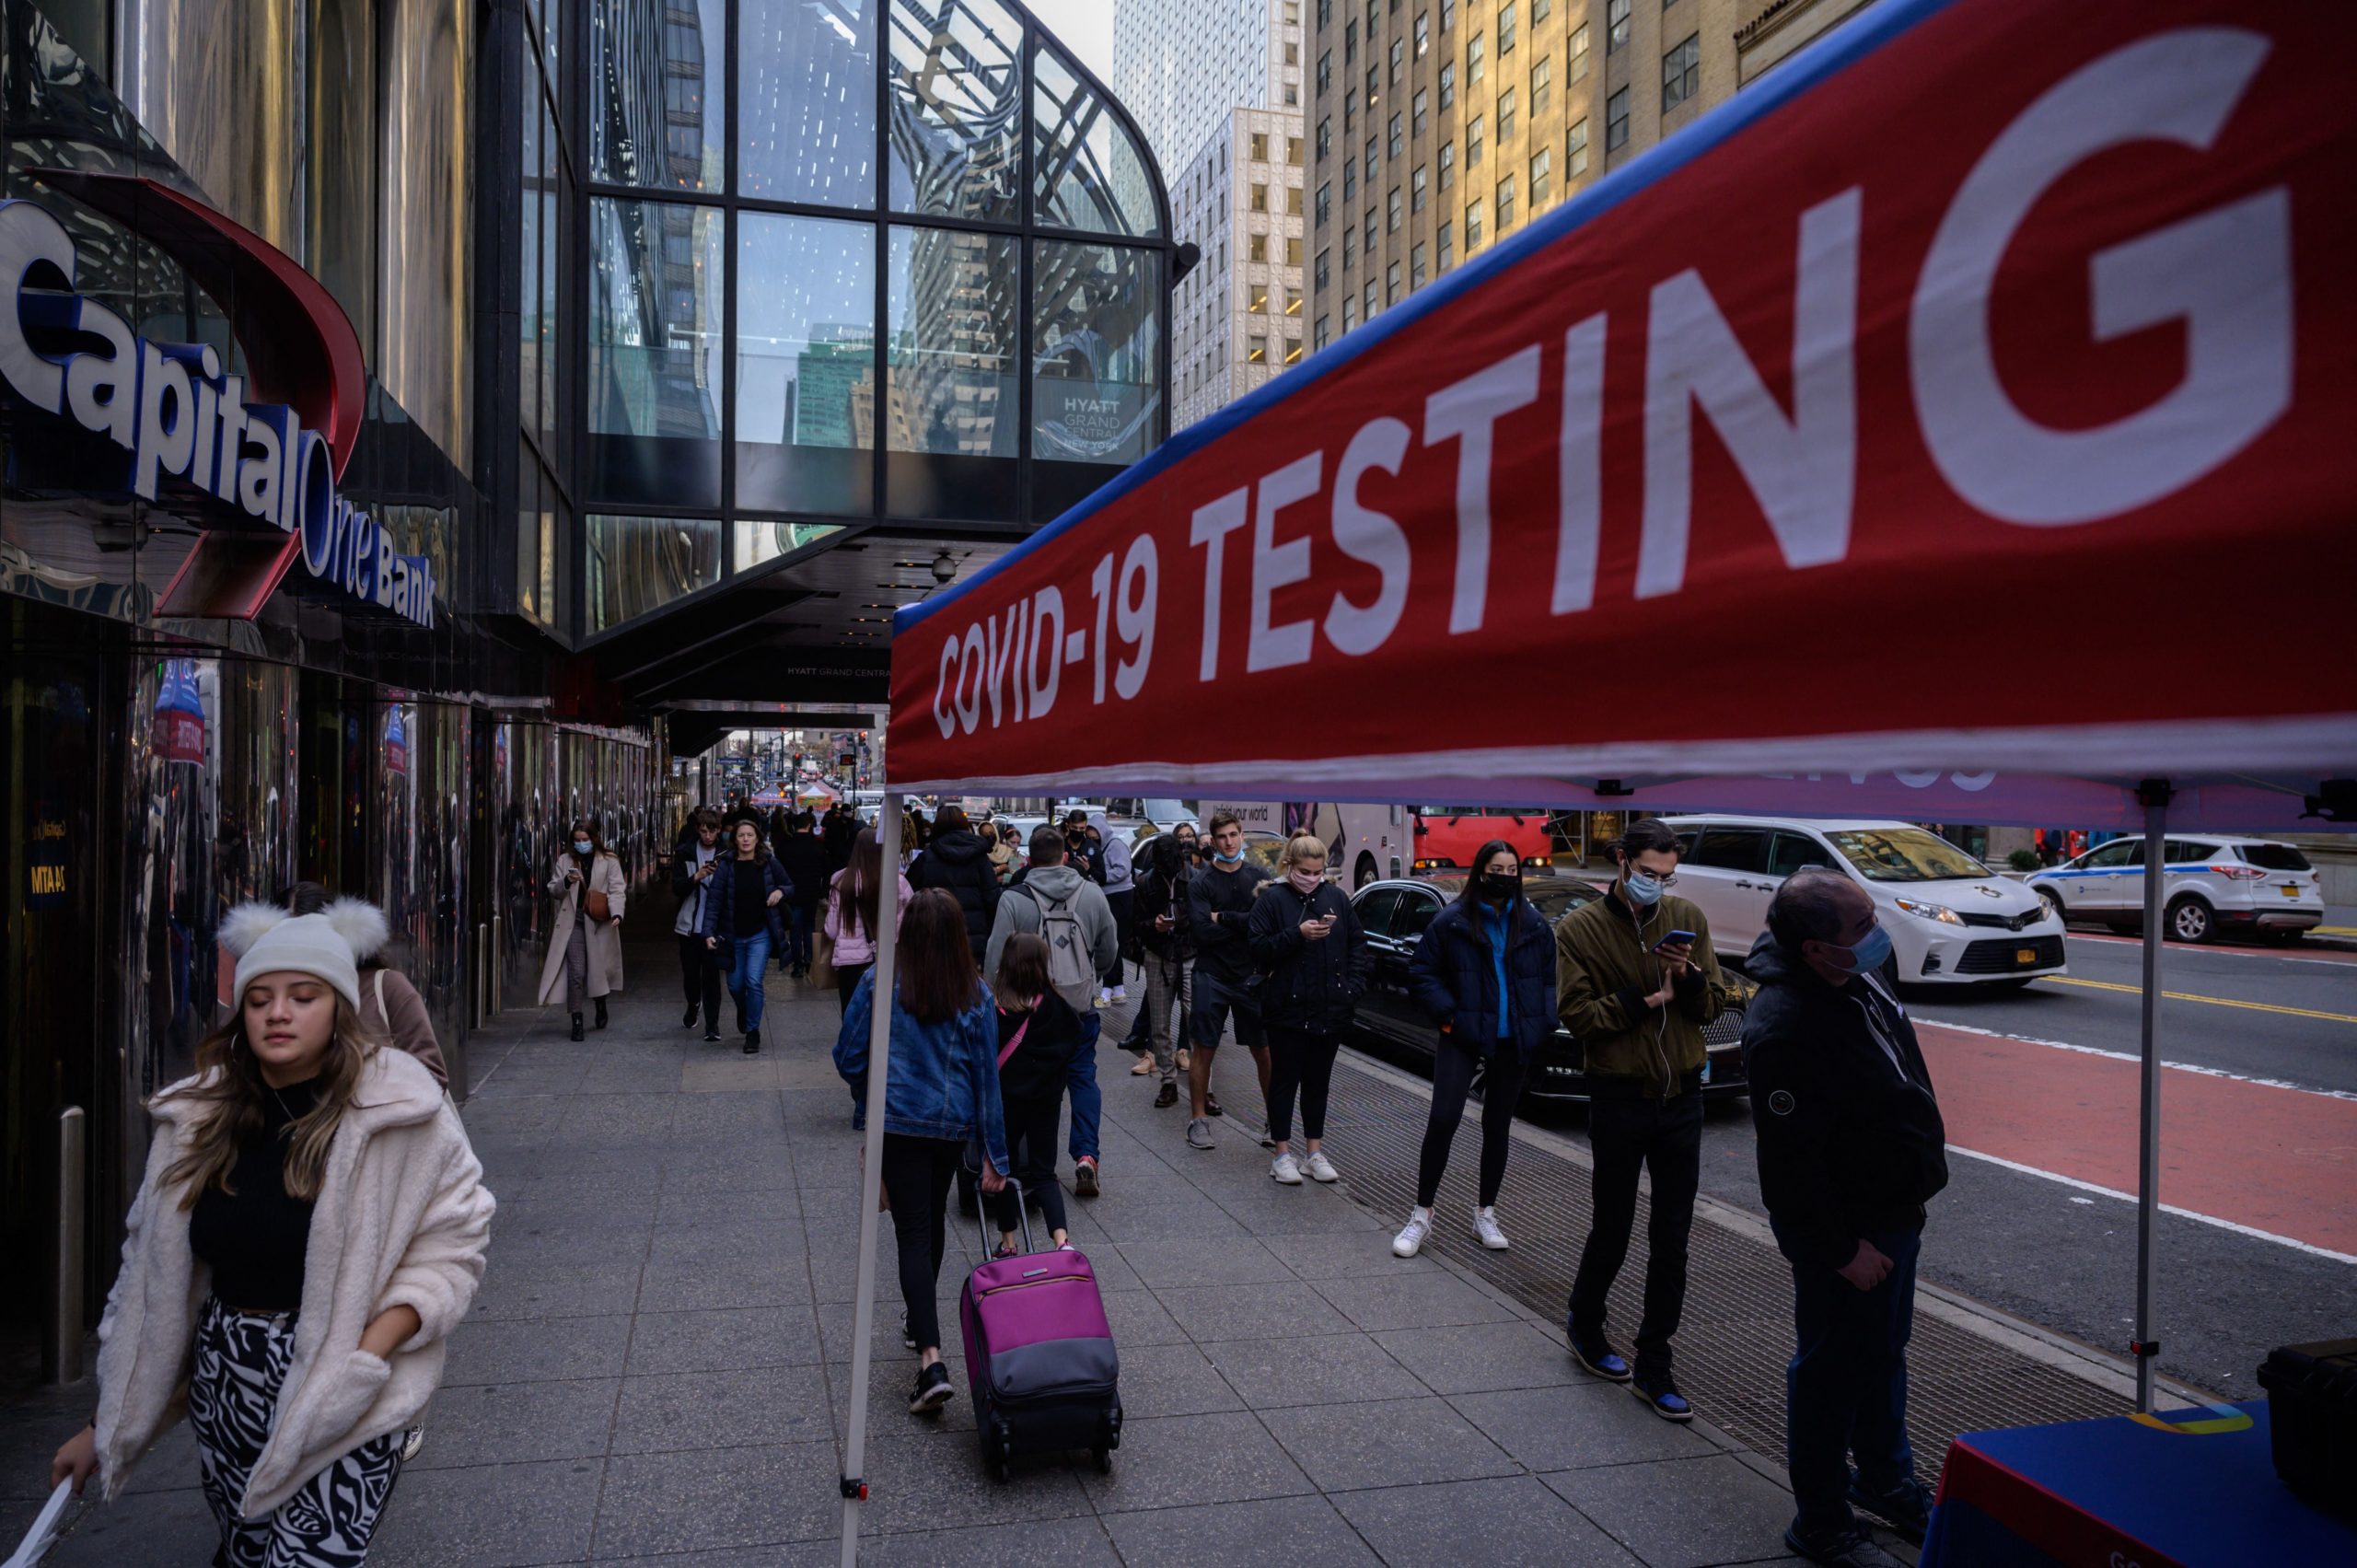 People queue to be tested for covid-19 at a street-side testing booth in New York on December 17, 2021. (Photo: Ed Jones/AFP, Getty Images)